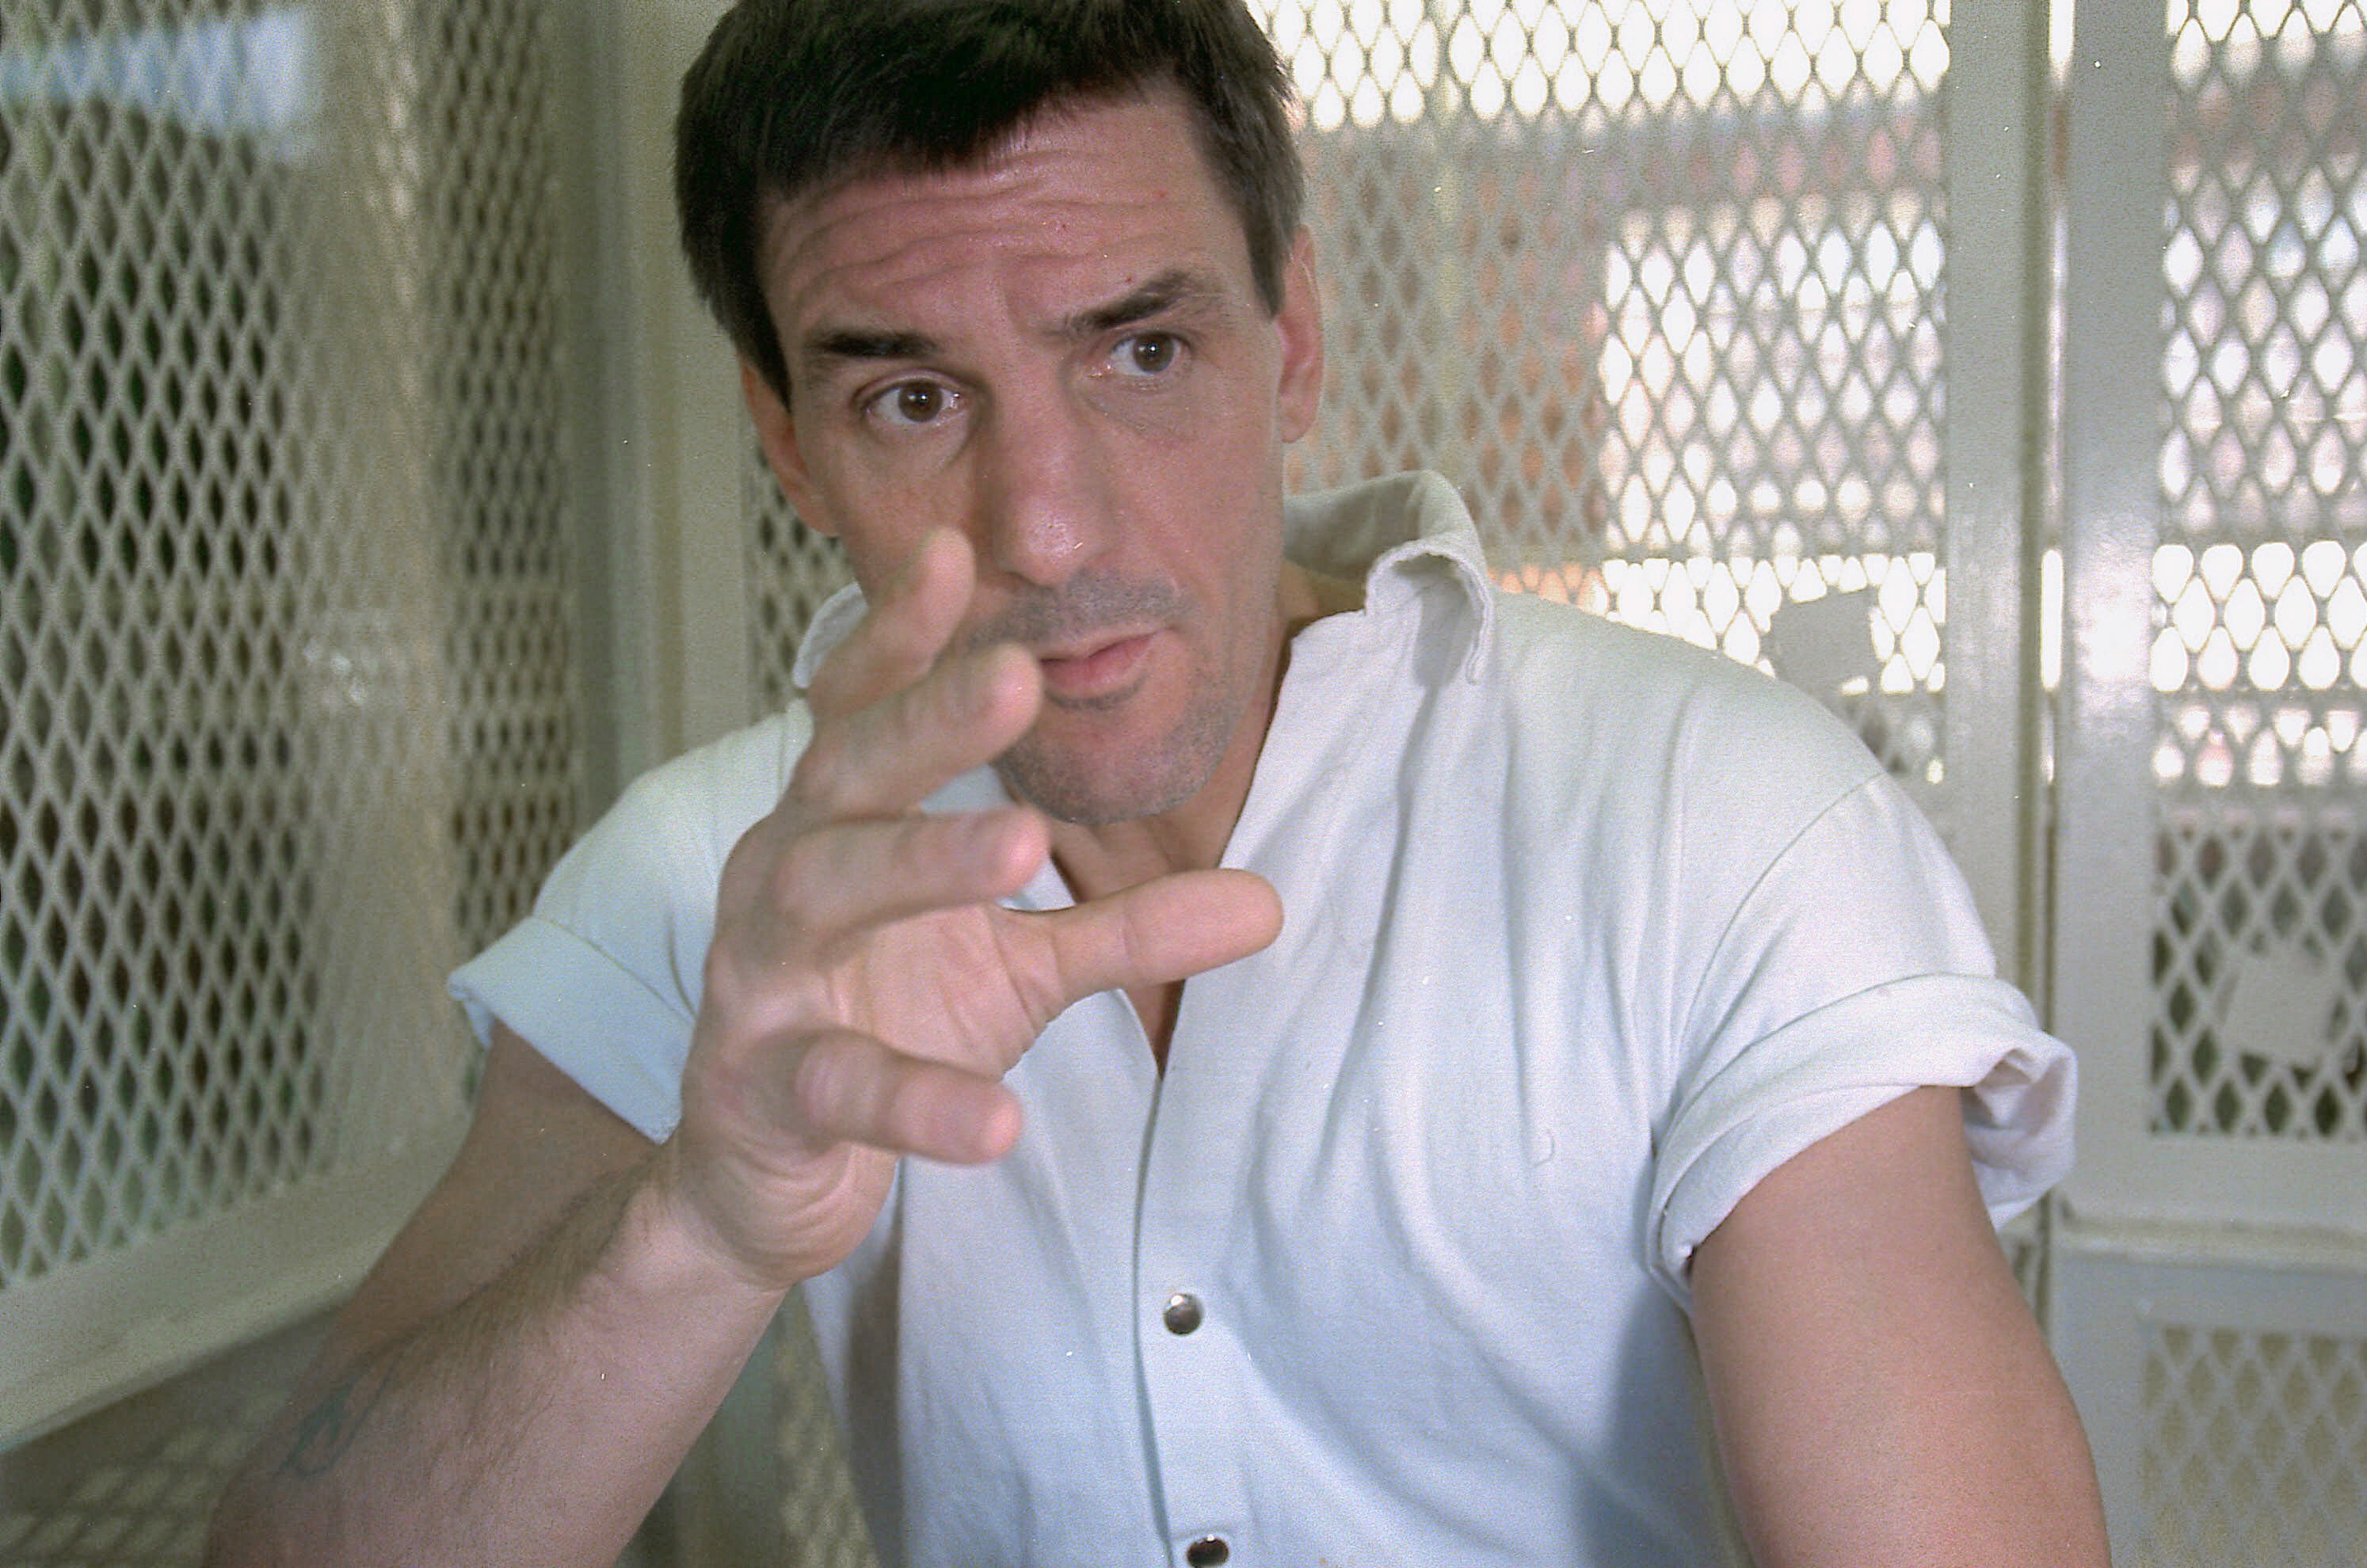 In this Nov. 19, 1999 file photo, Texas death row inmate Scott Panetti talks during a prison interview in Huntsville, Texas, where he is on death row for the 1992 murder of his wife's parents. Panetti's execution is set for Dec. 3, 2014. (Scott Coomer—AP)